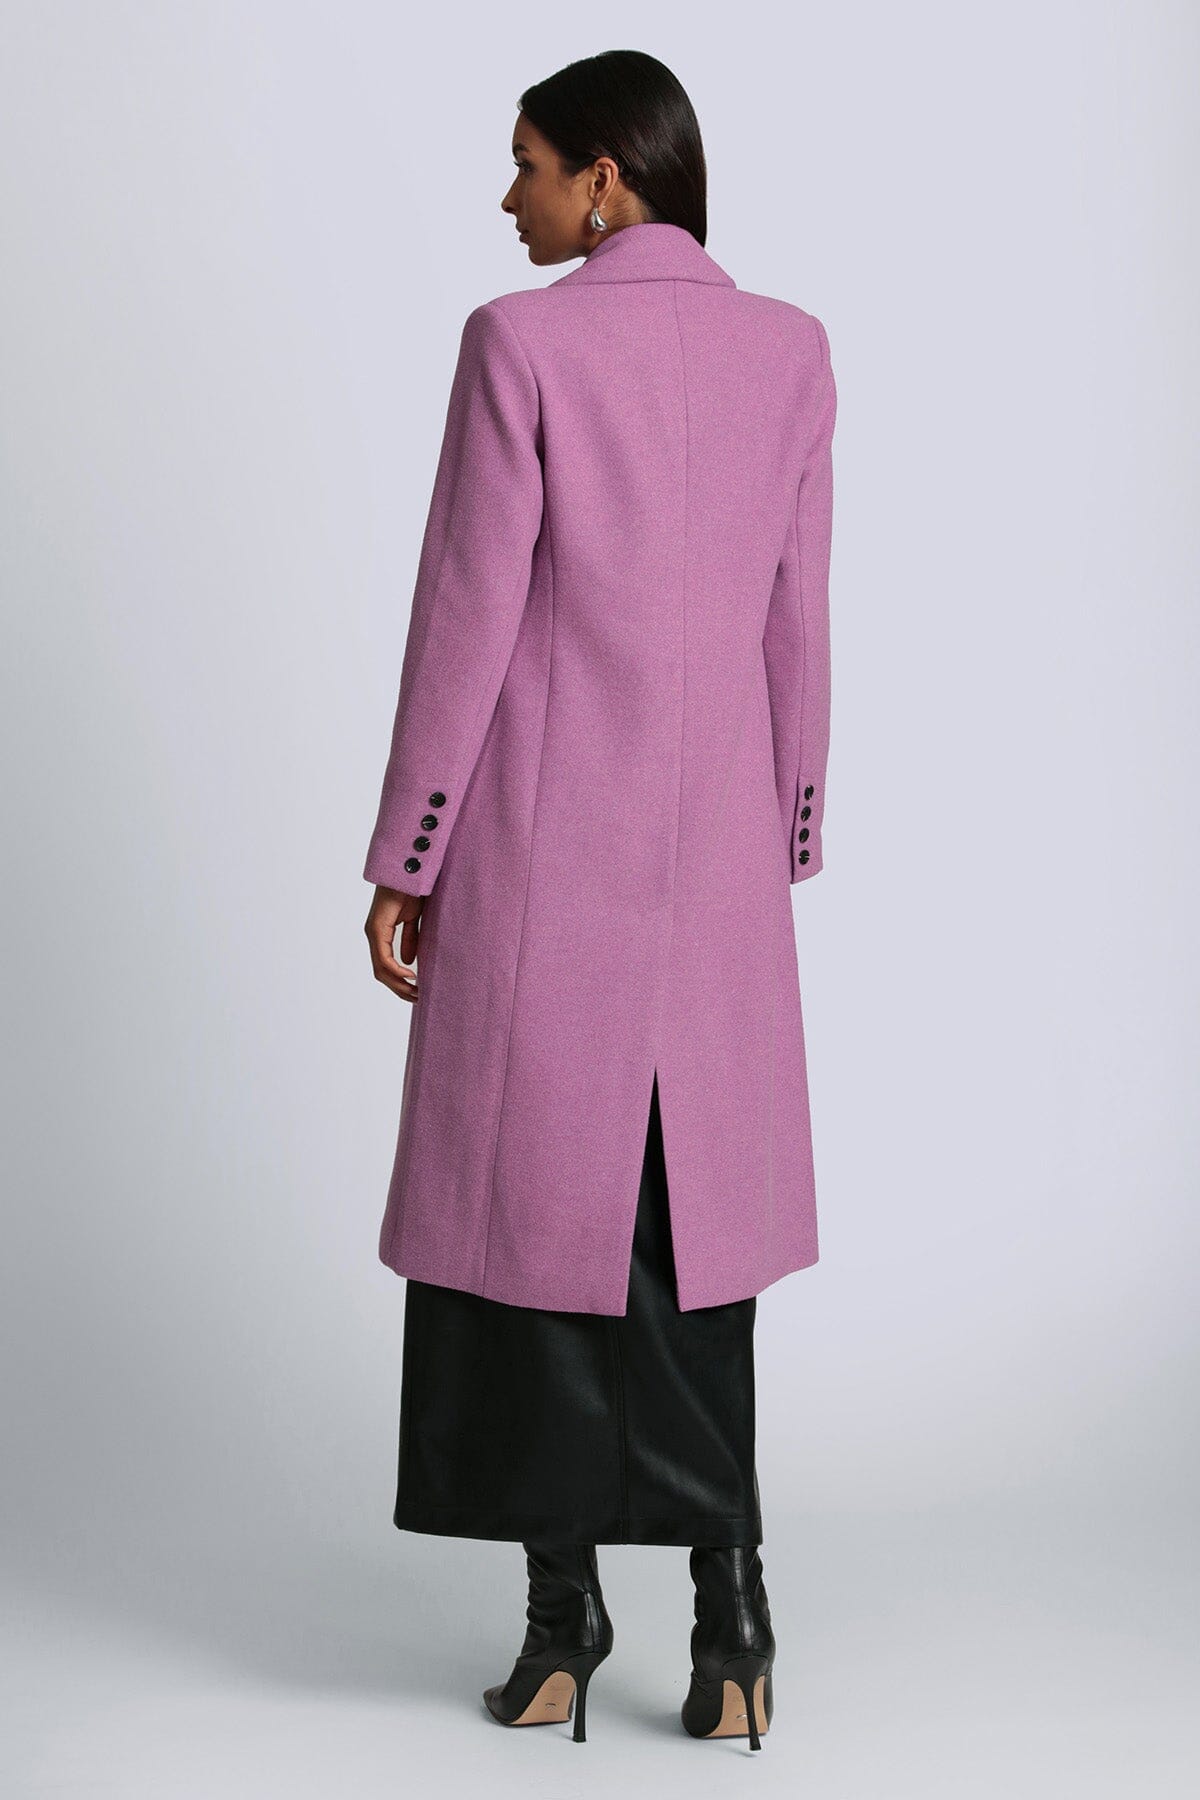 hyacinth pink tailored double-breasted long coat by Avec Les Filles Coats & Jackets